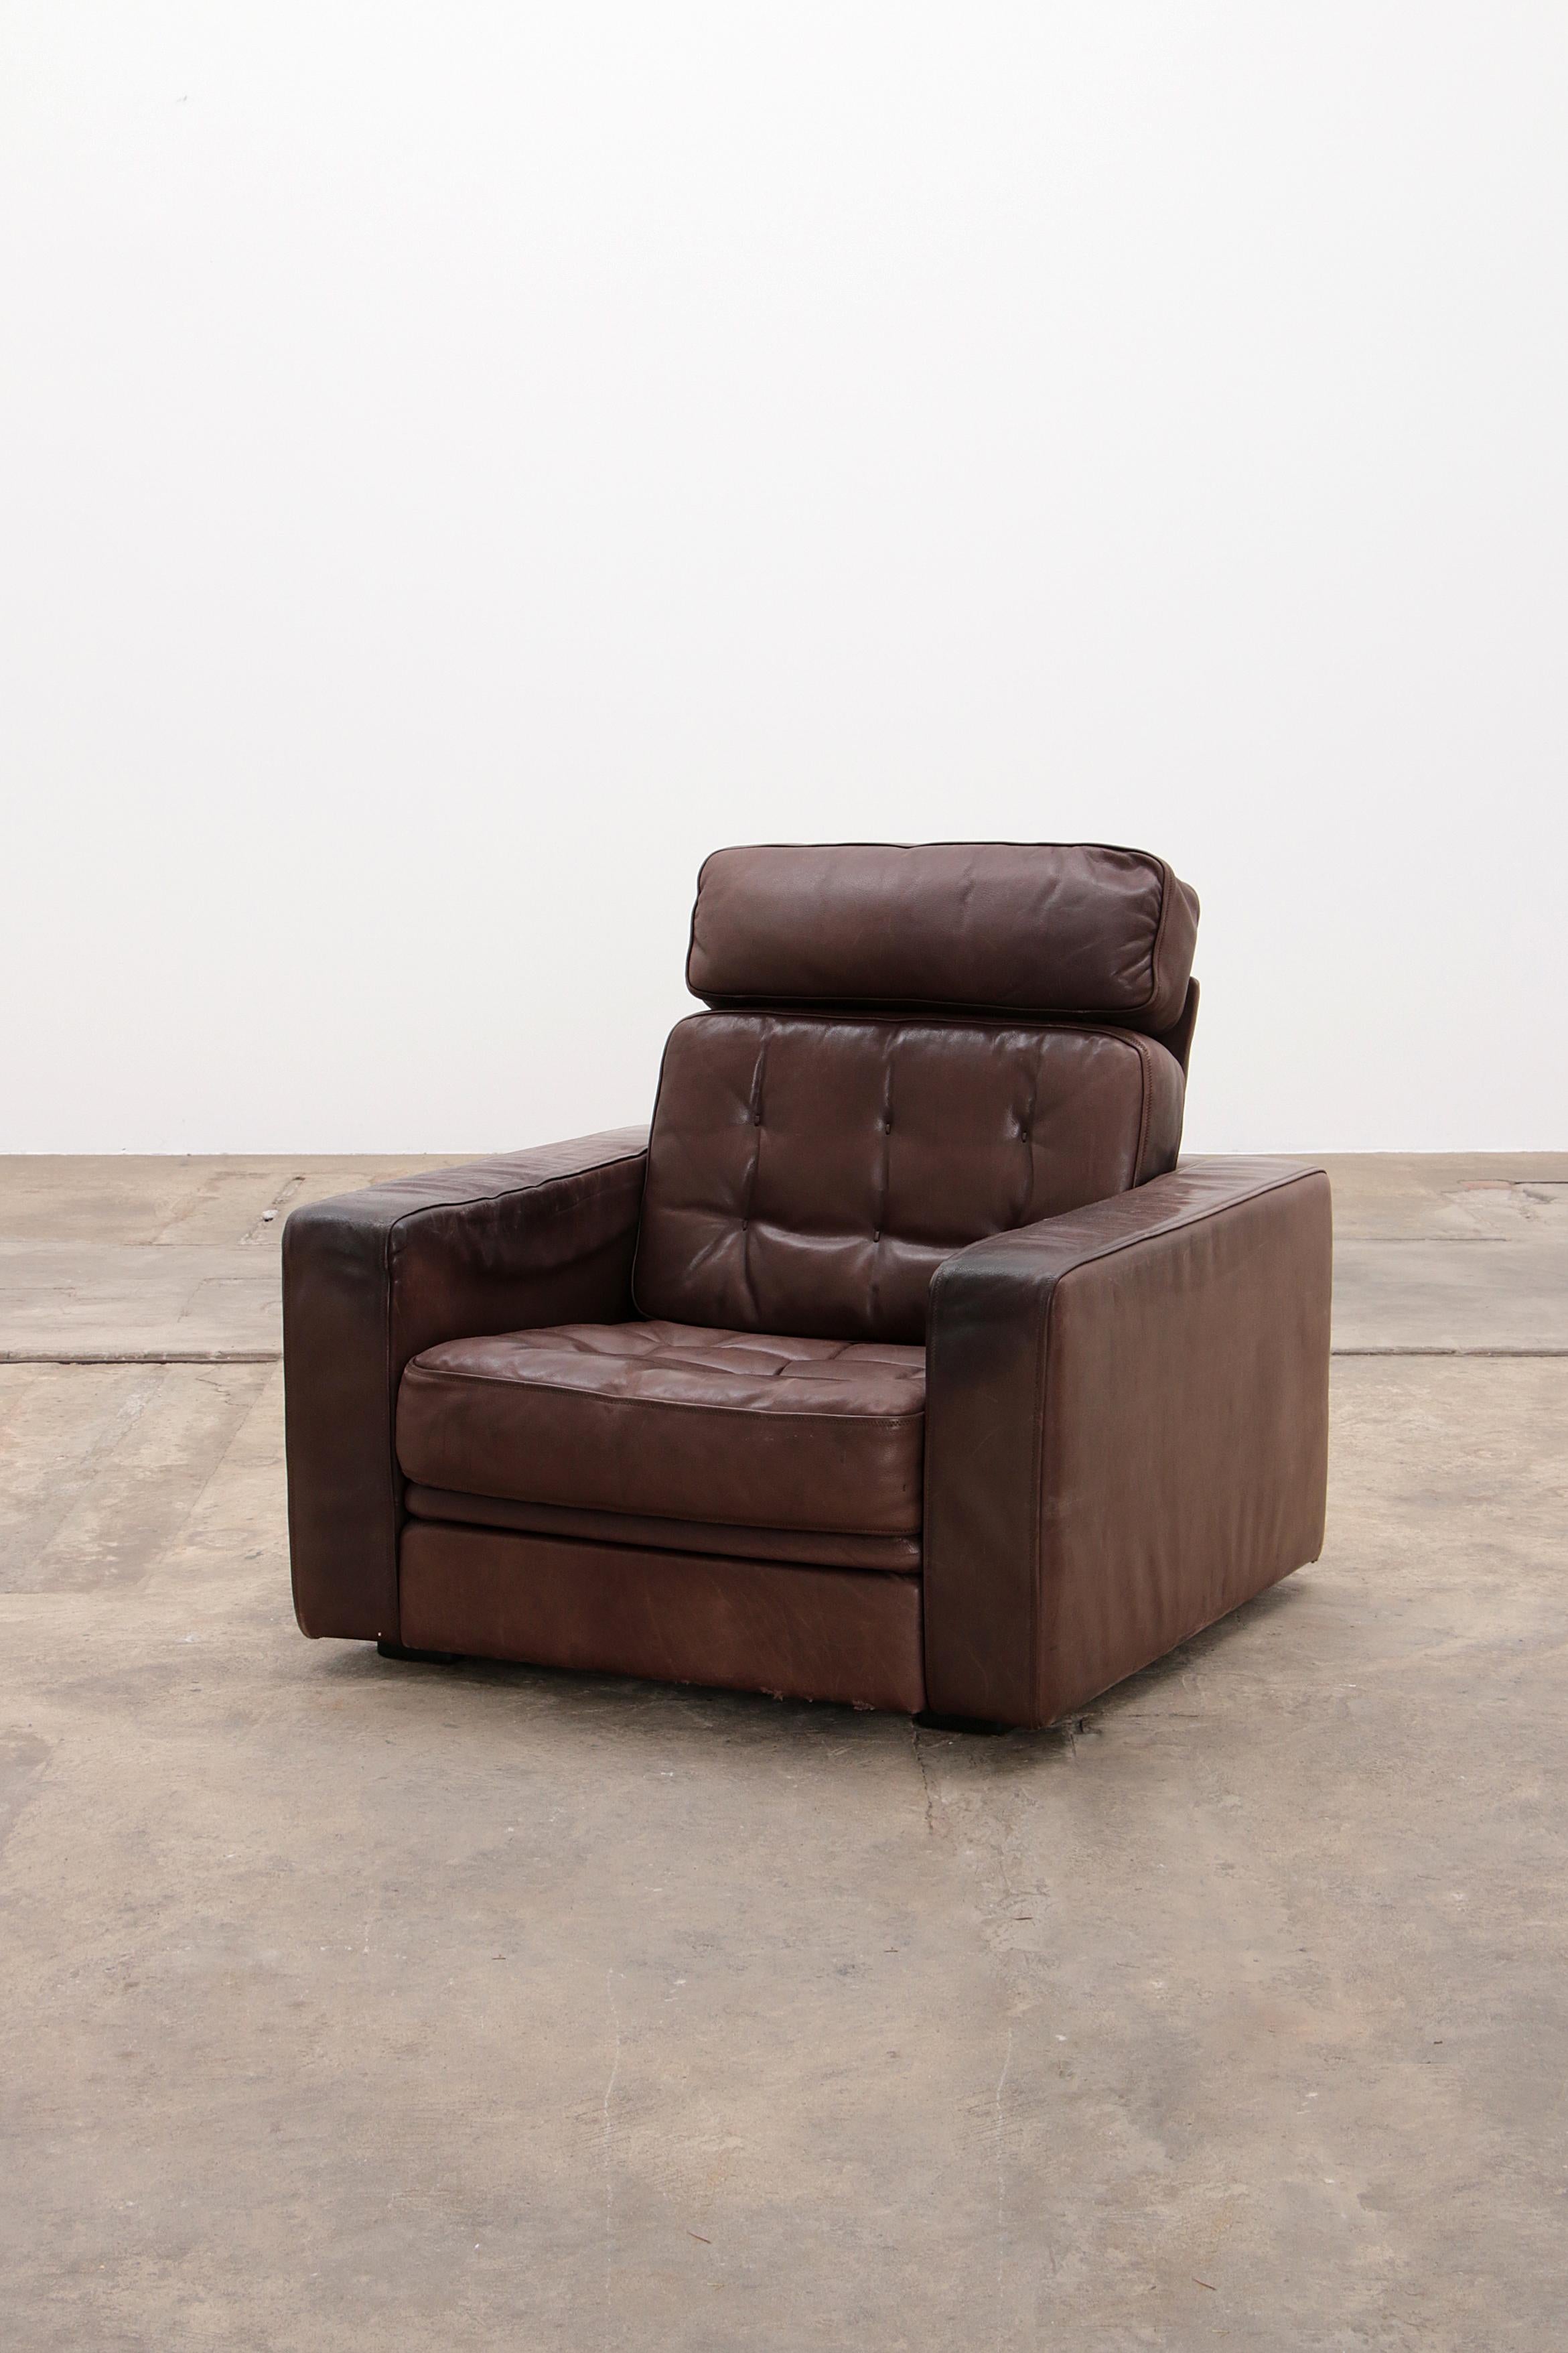 Time to relax!

This sturdy leather club chair from De Sede is made for relaxing. Period: 1970s. Country of origin: Switzerland.

A fantastic relax armchair in brown leather with a beautiful patina & a wonderfully comfortable seat.

The armrests